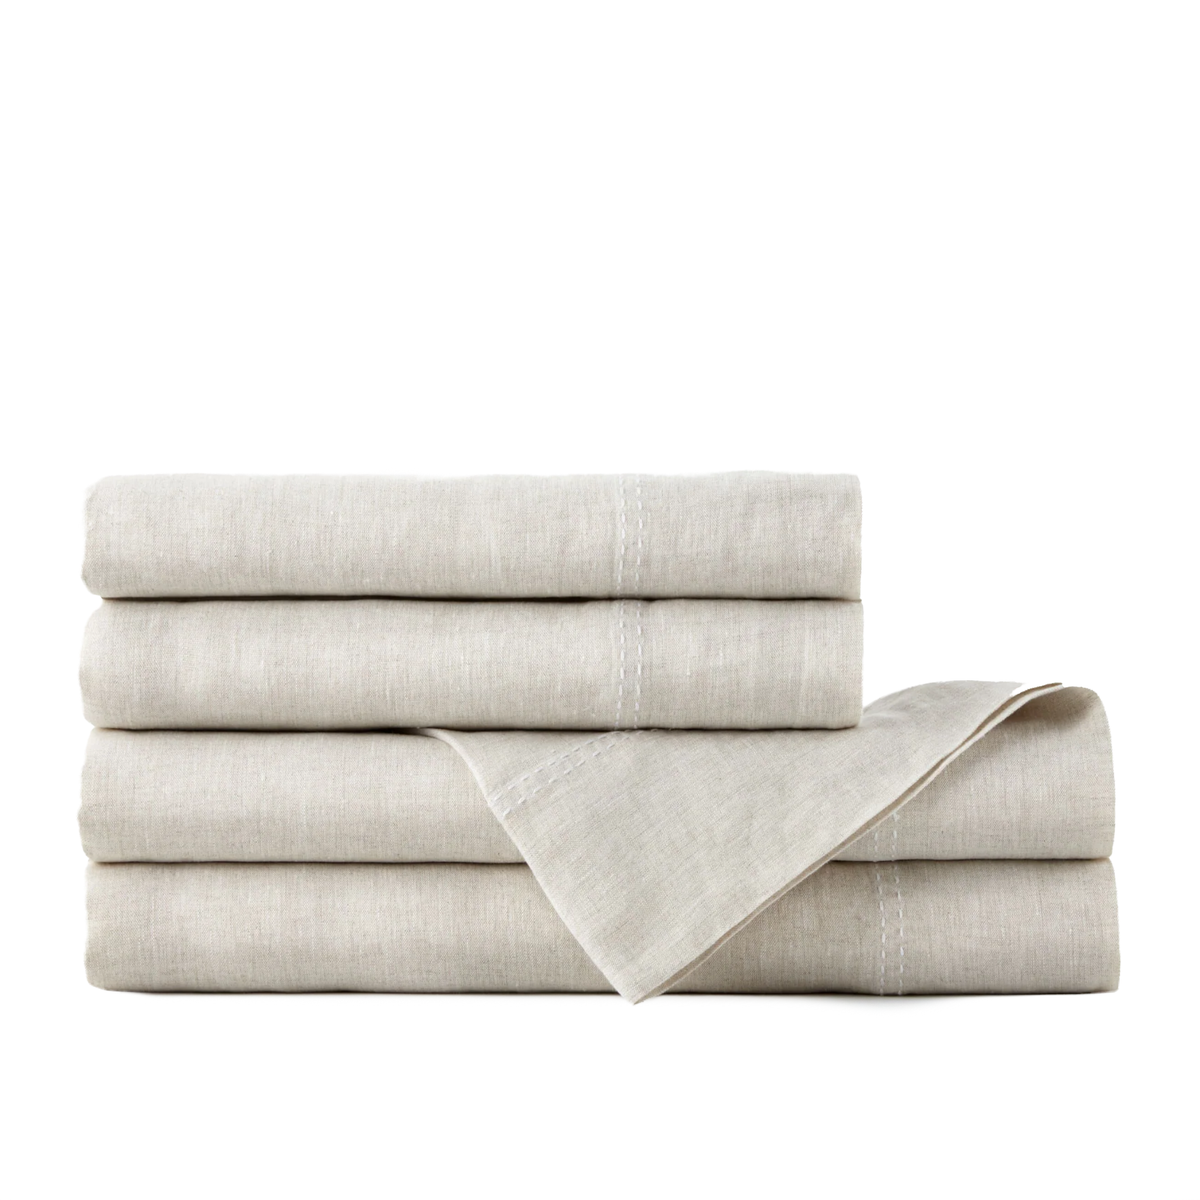 Sheet Set of Peacock Alley European Washed Linen Bedding in Natural Color